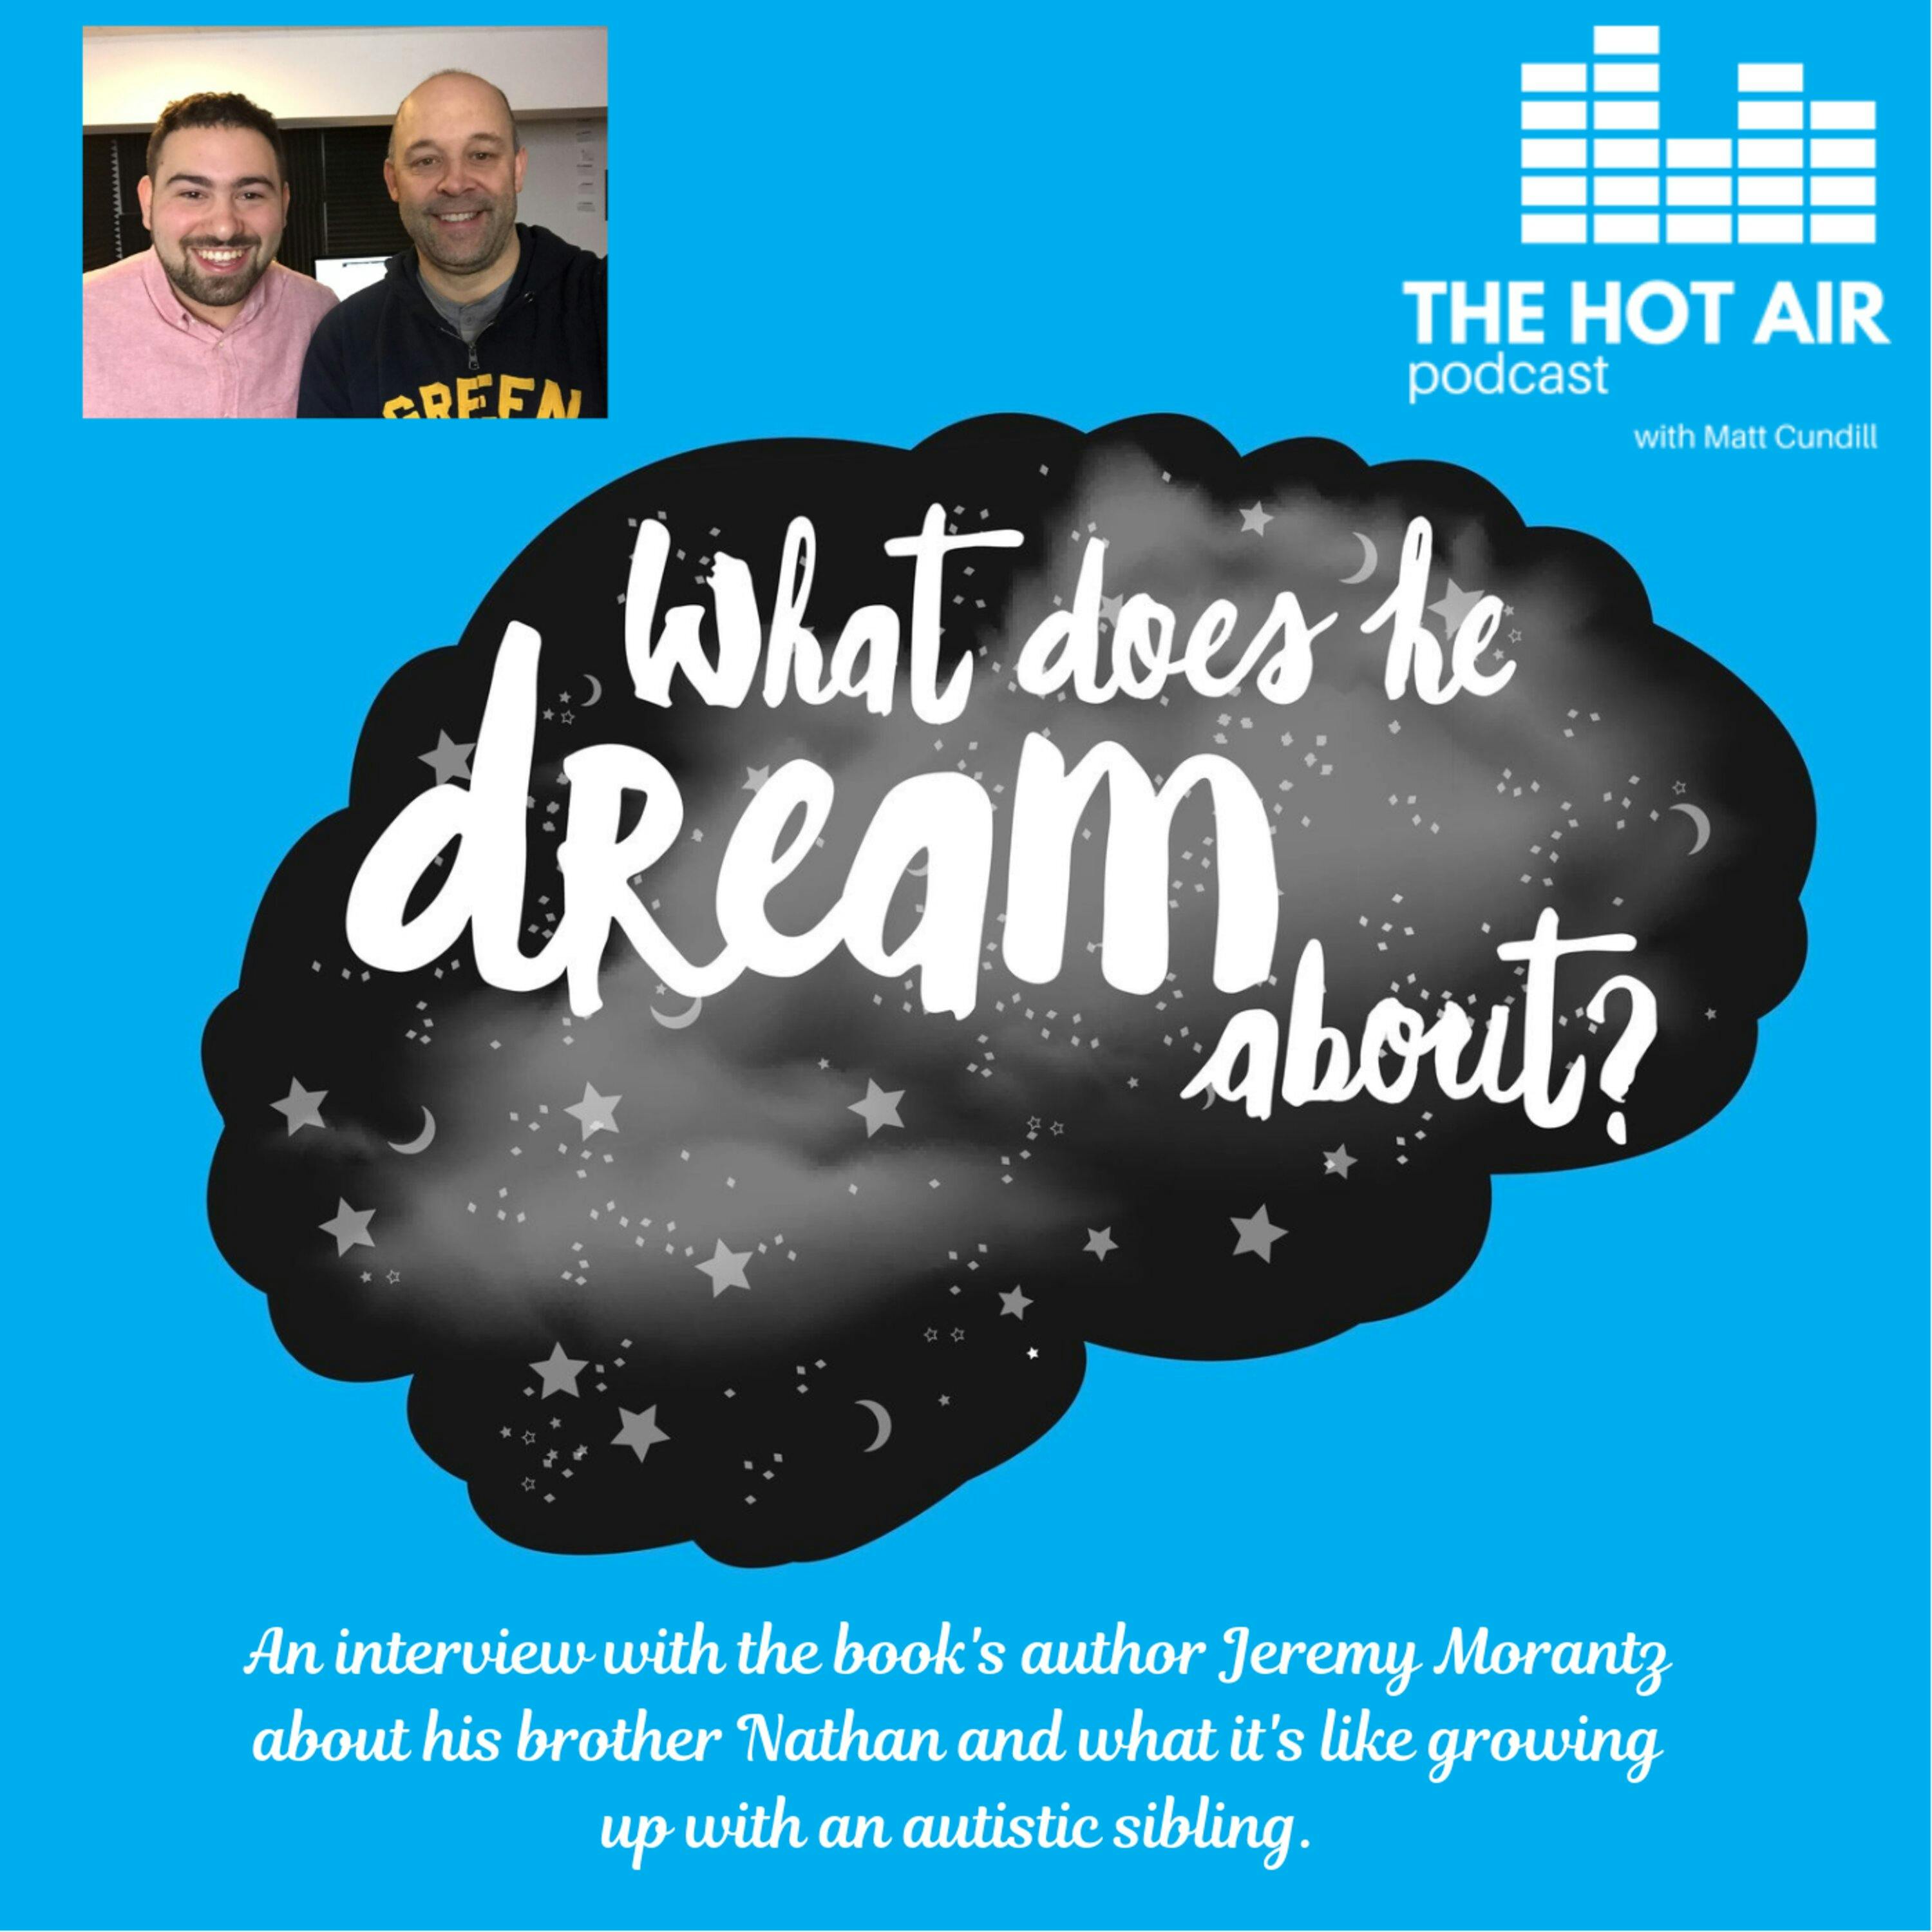 Jeremy Morantz on his Brother, Autism, and New Book